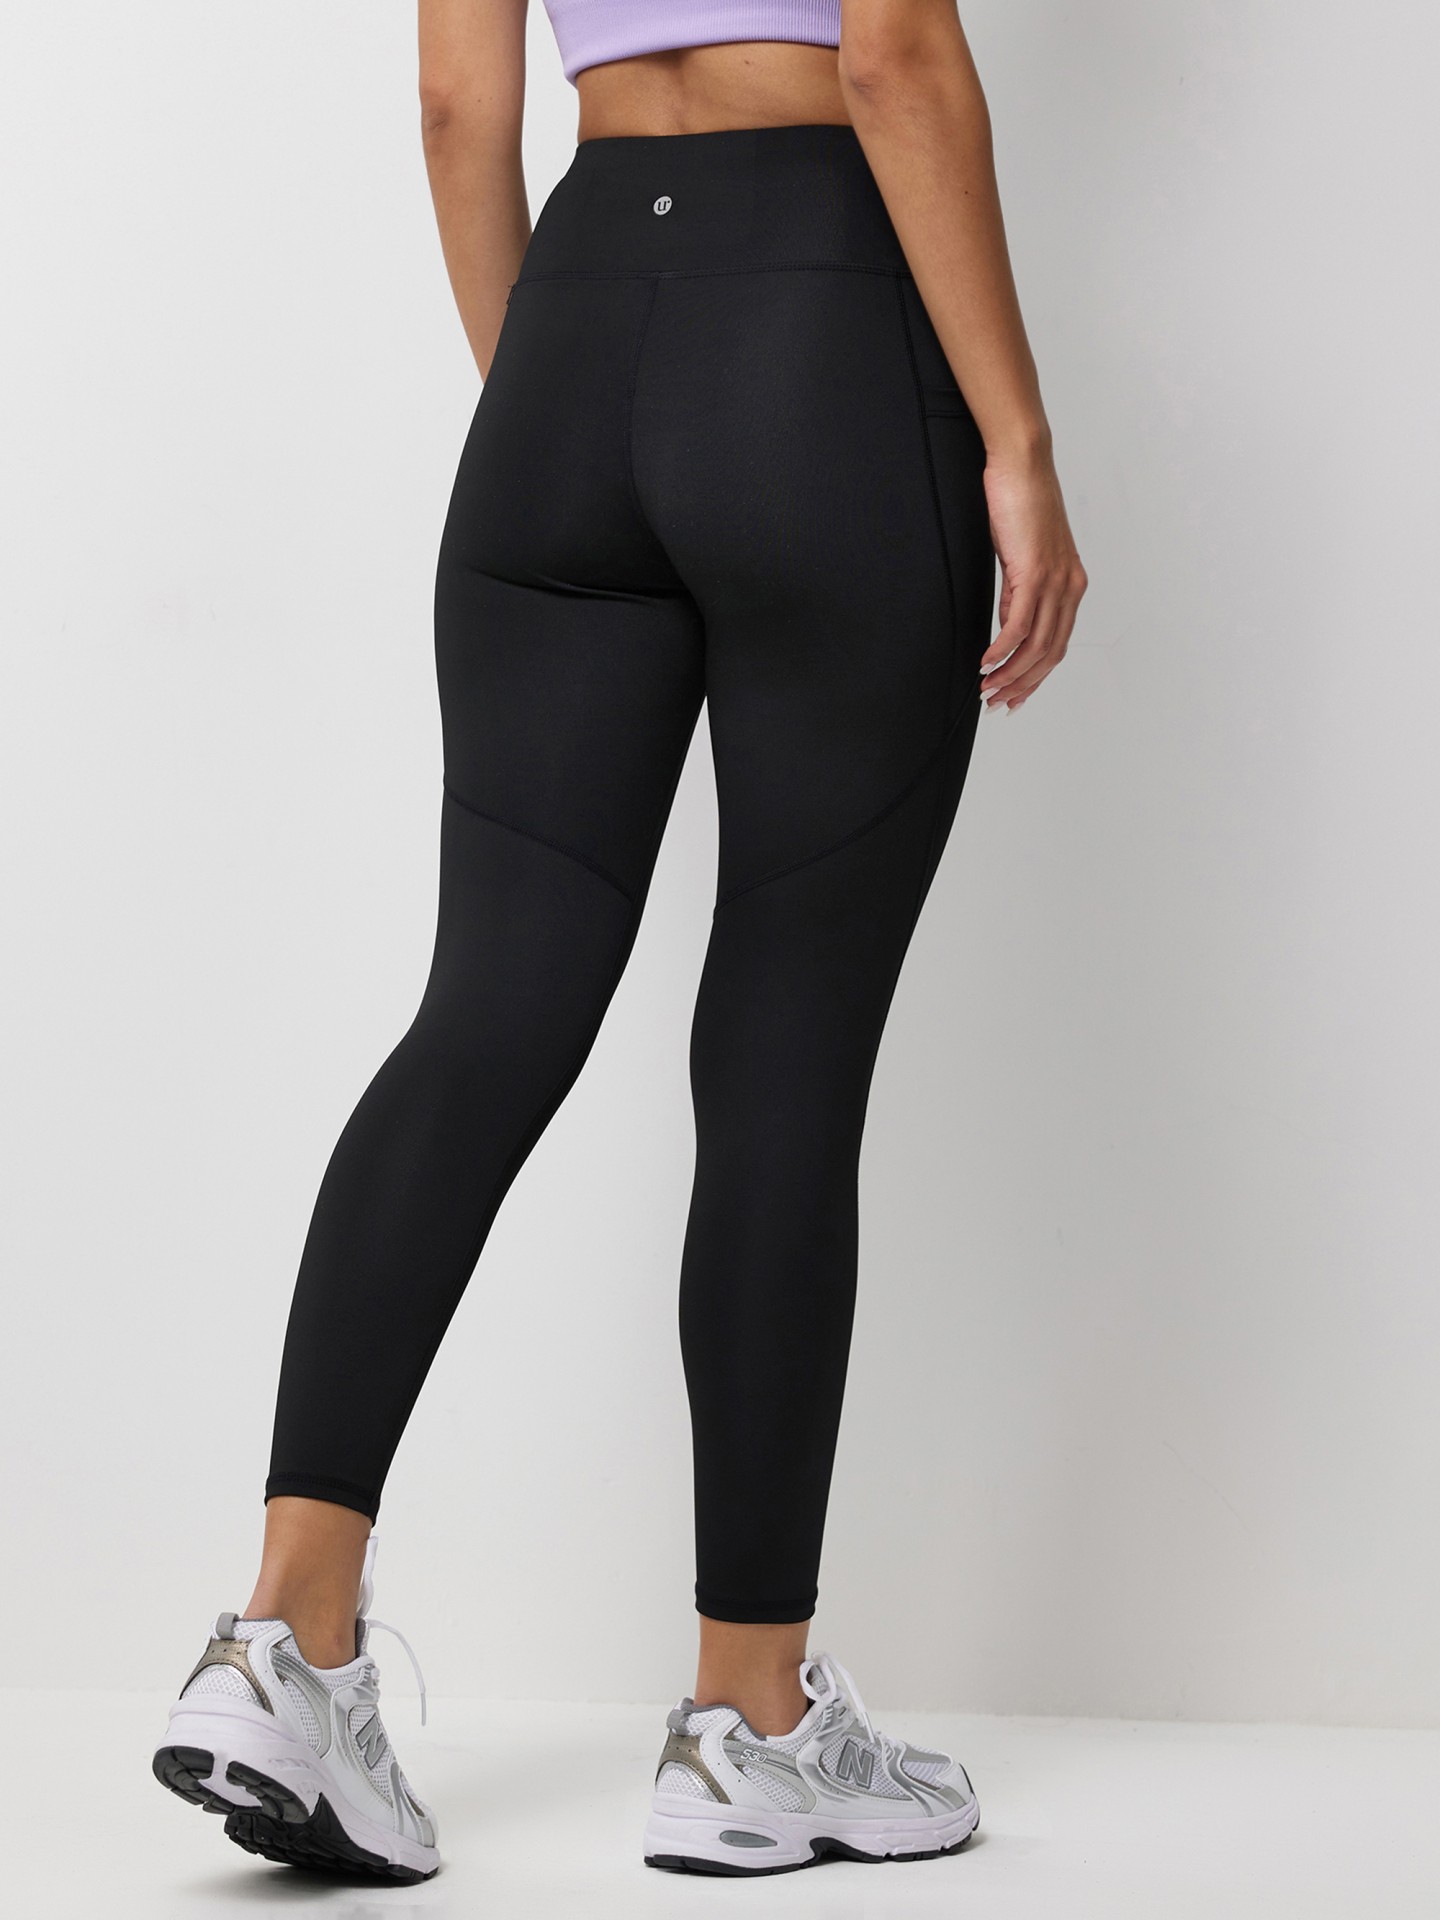 RGFT womens fitness leggings size M black stretch skinny solid spell out  040616